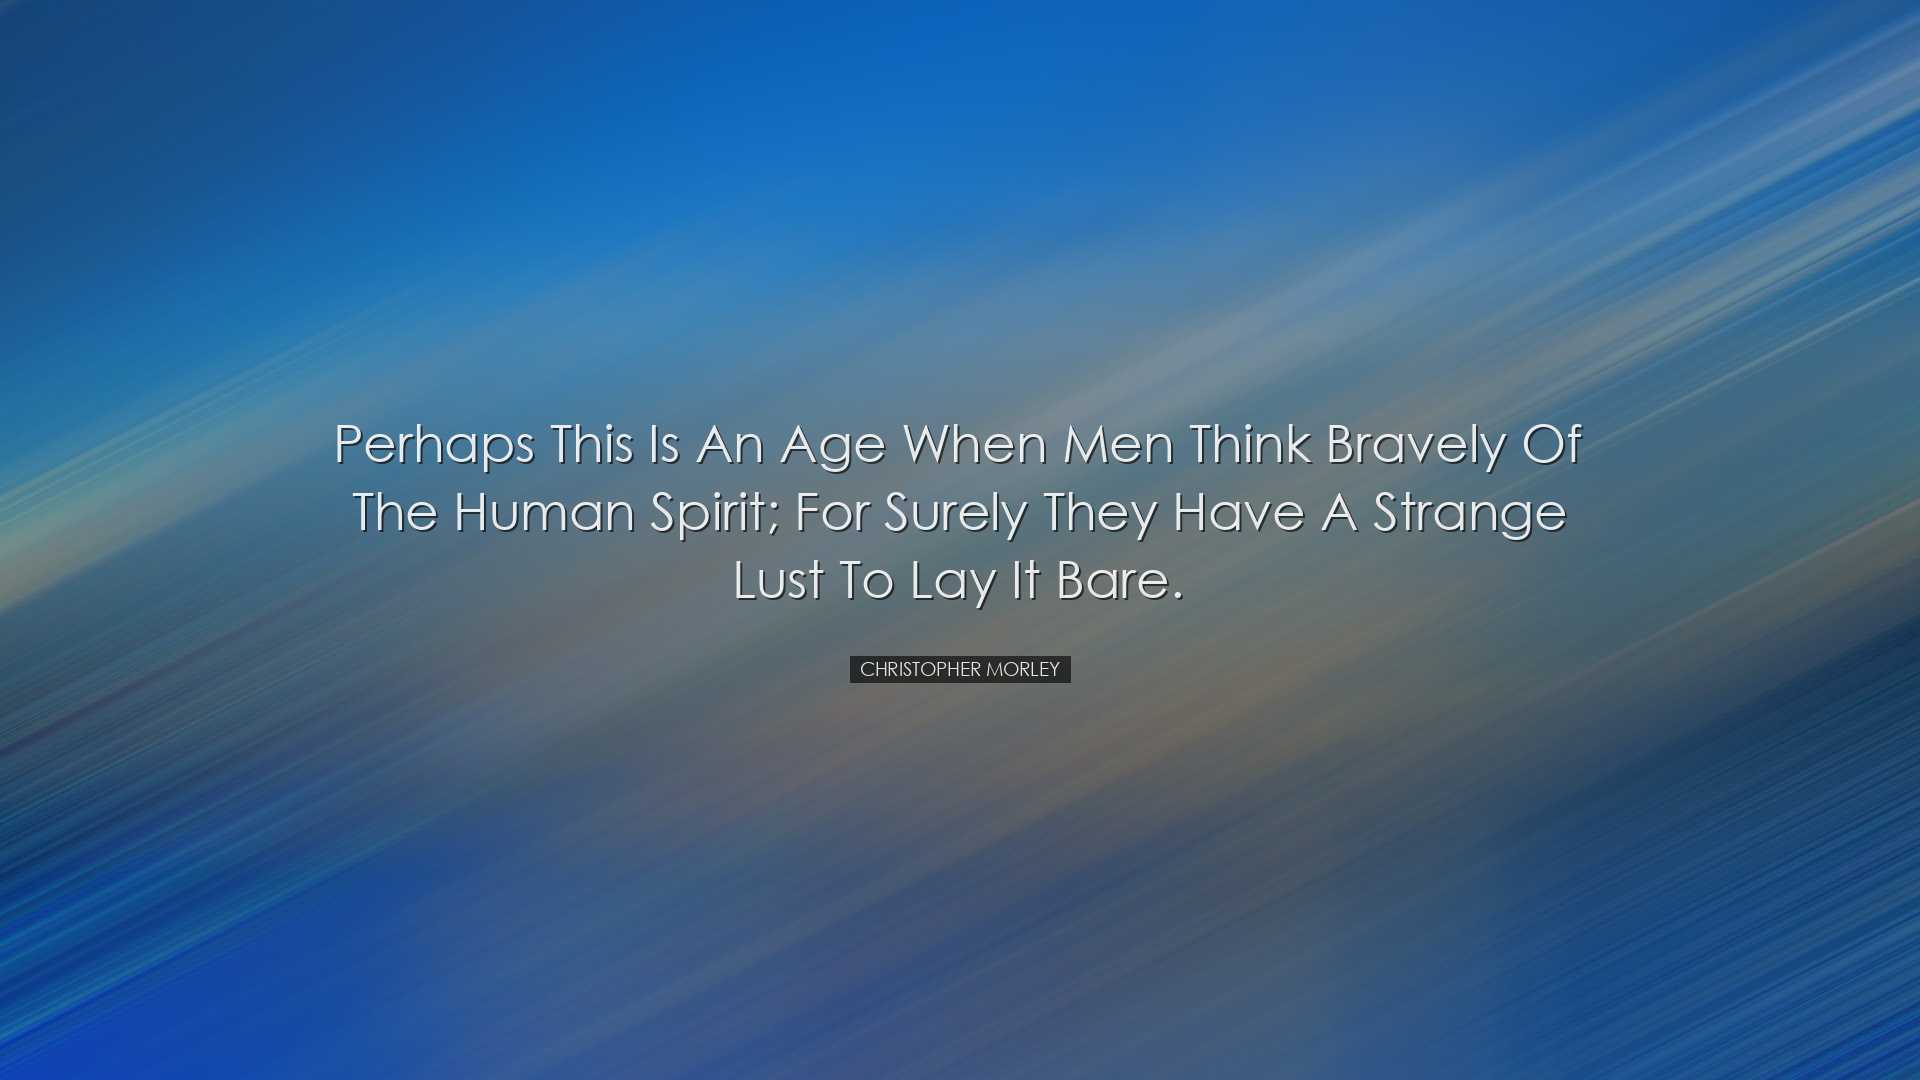 Perhaps this is an age when men think bravely of the human spirit;